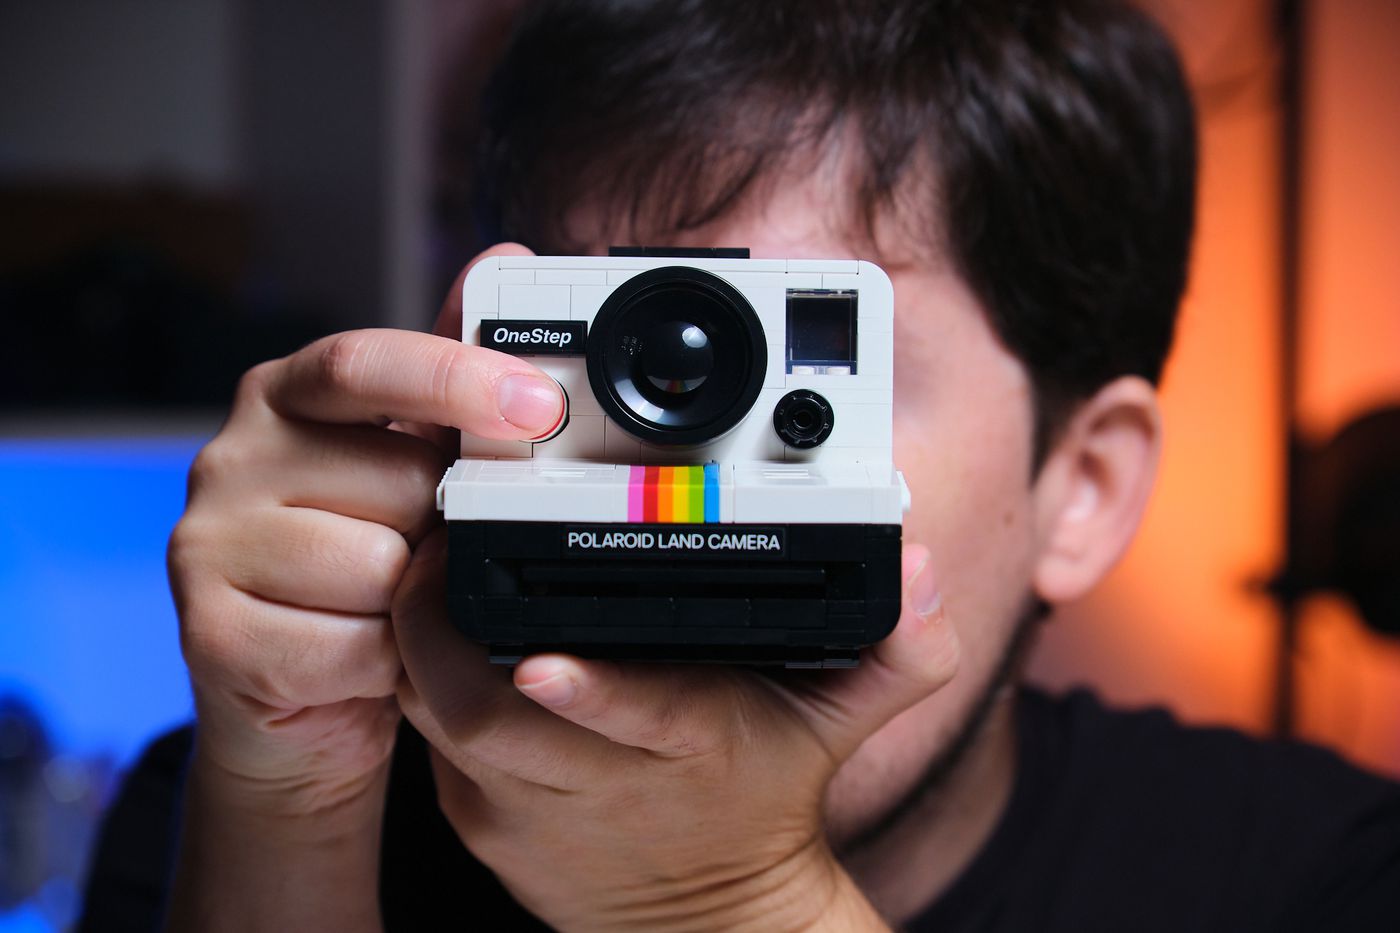 I hold up the final prototype of Lego’s Polaroid as if to take a photo, with its iconic “OneStep” and “Polaroid Land Camera” badges on display.